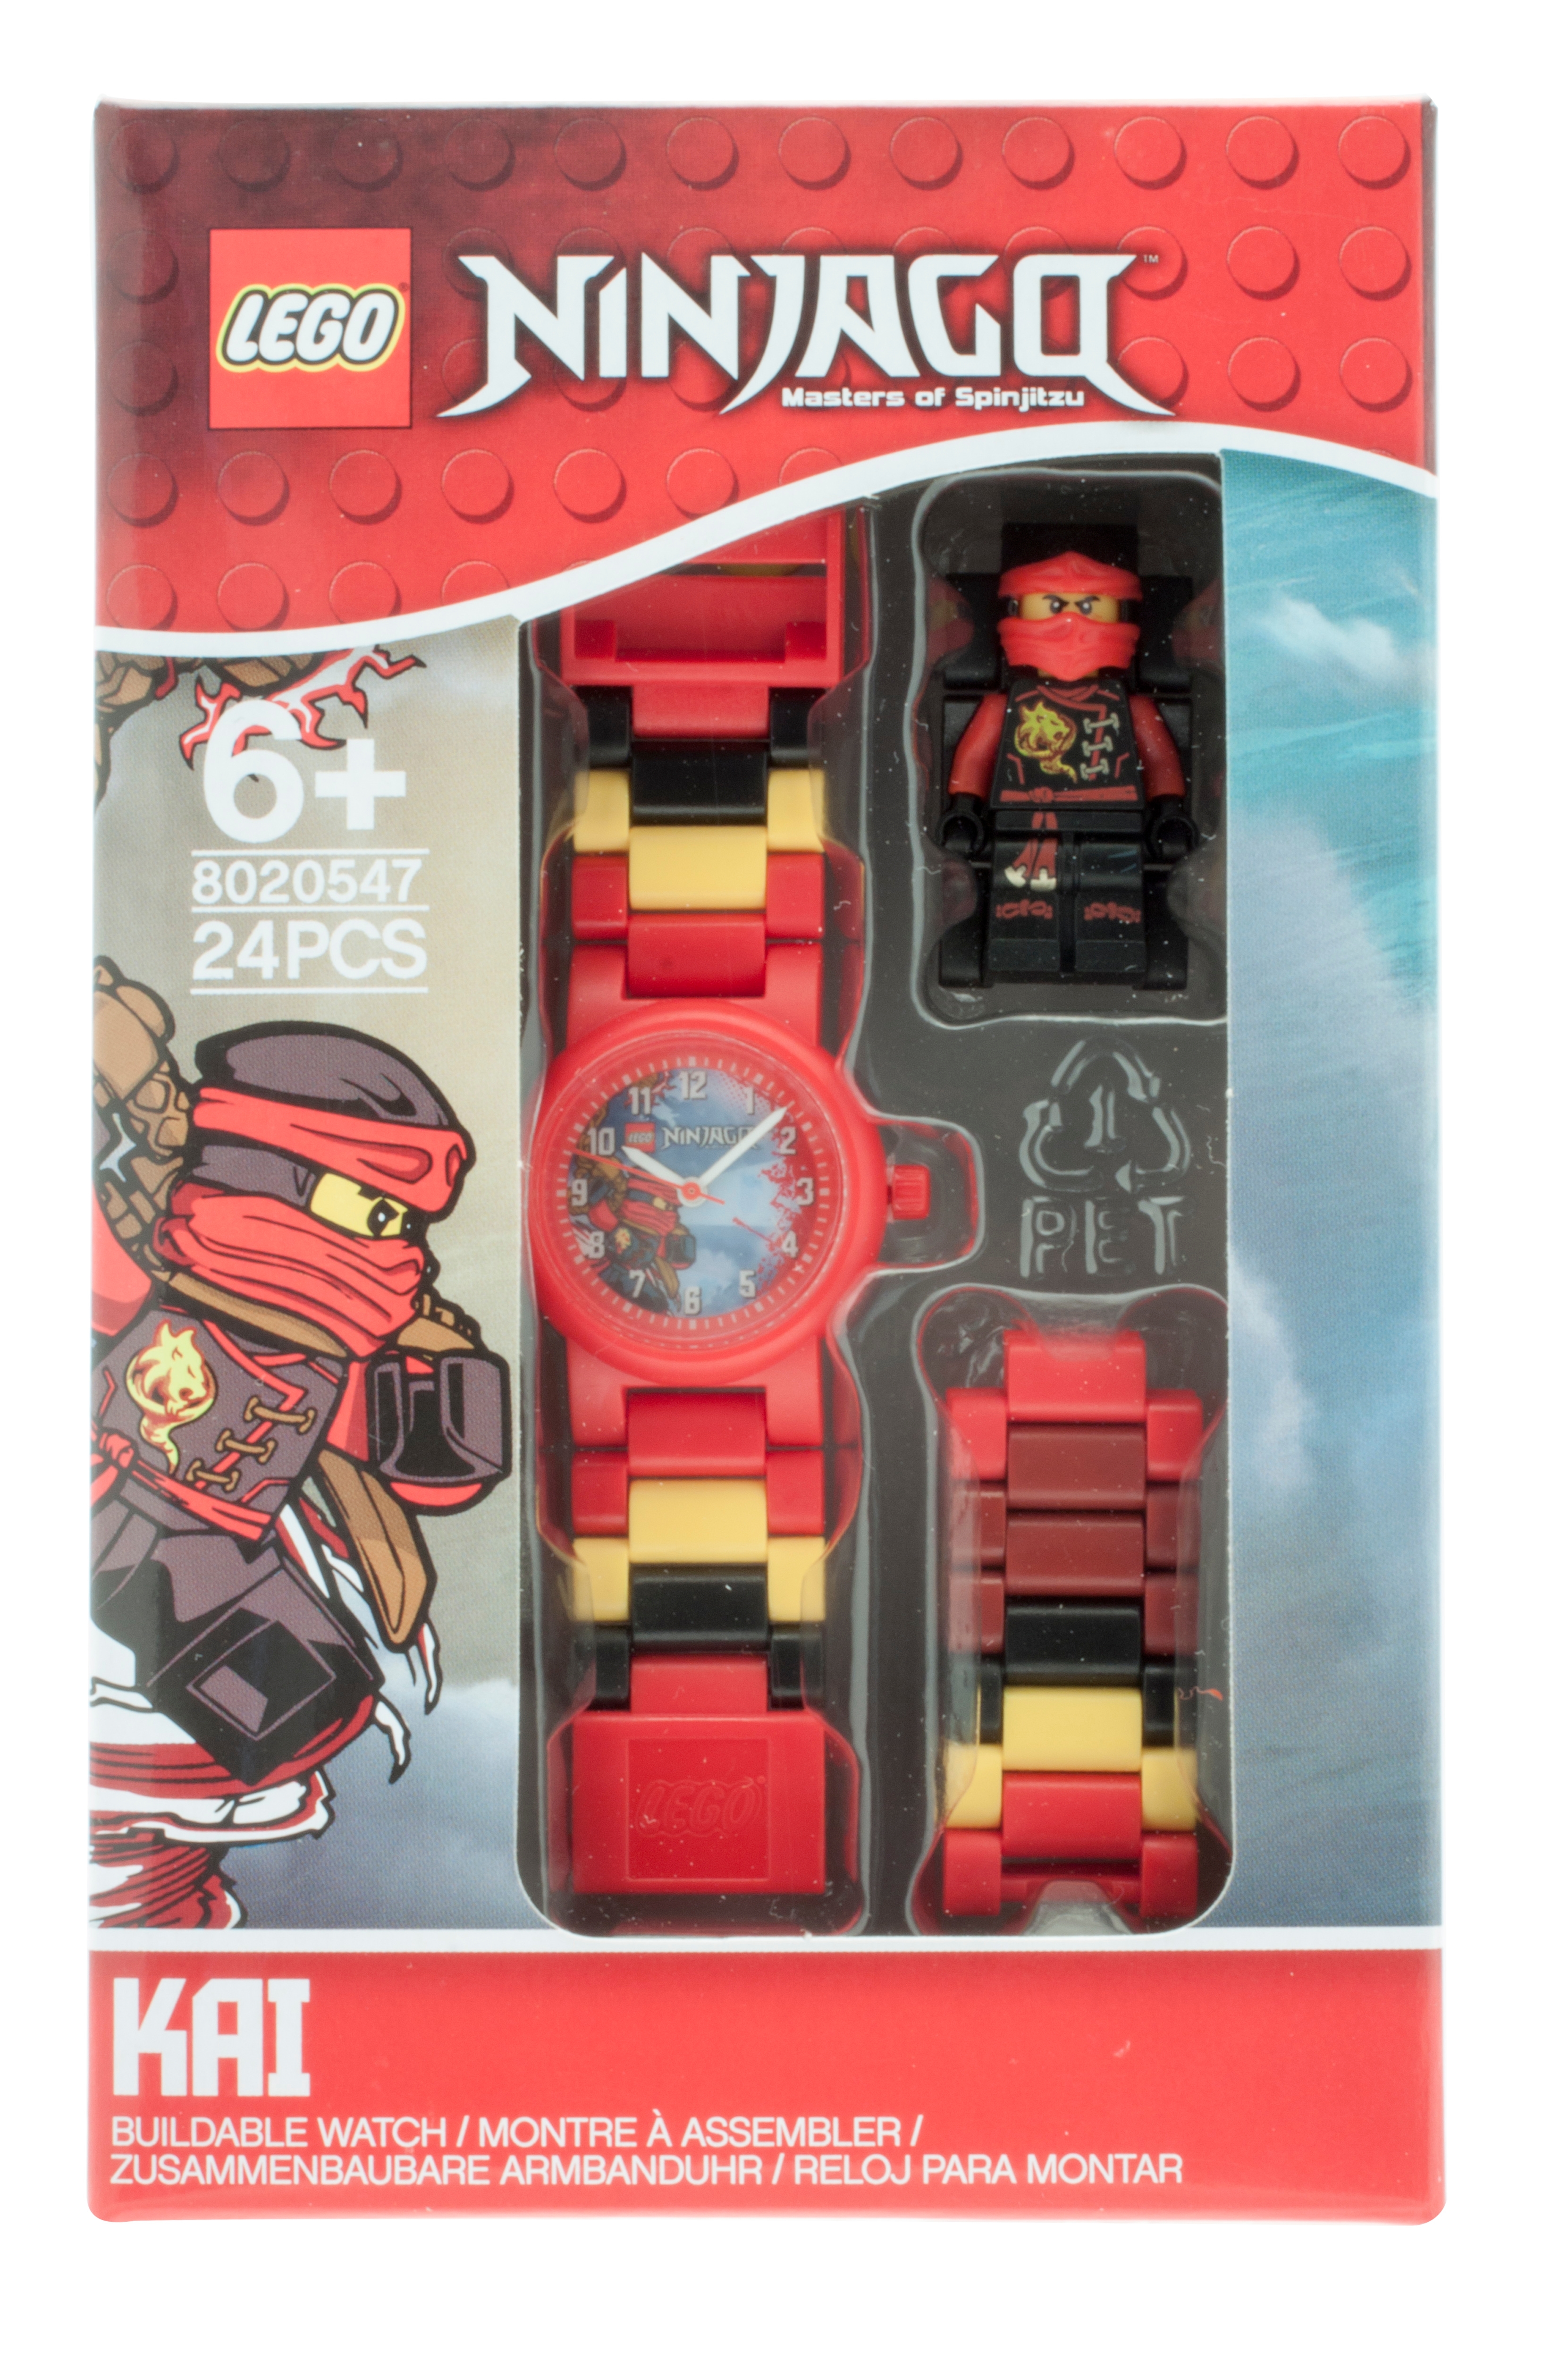 LEGO® Sky Pirates Kai Kids Buildable Watch | NINJAGO® Buy online at the Official LEGO® Shop US